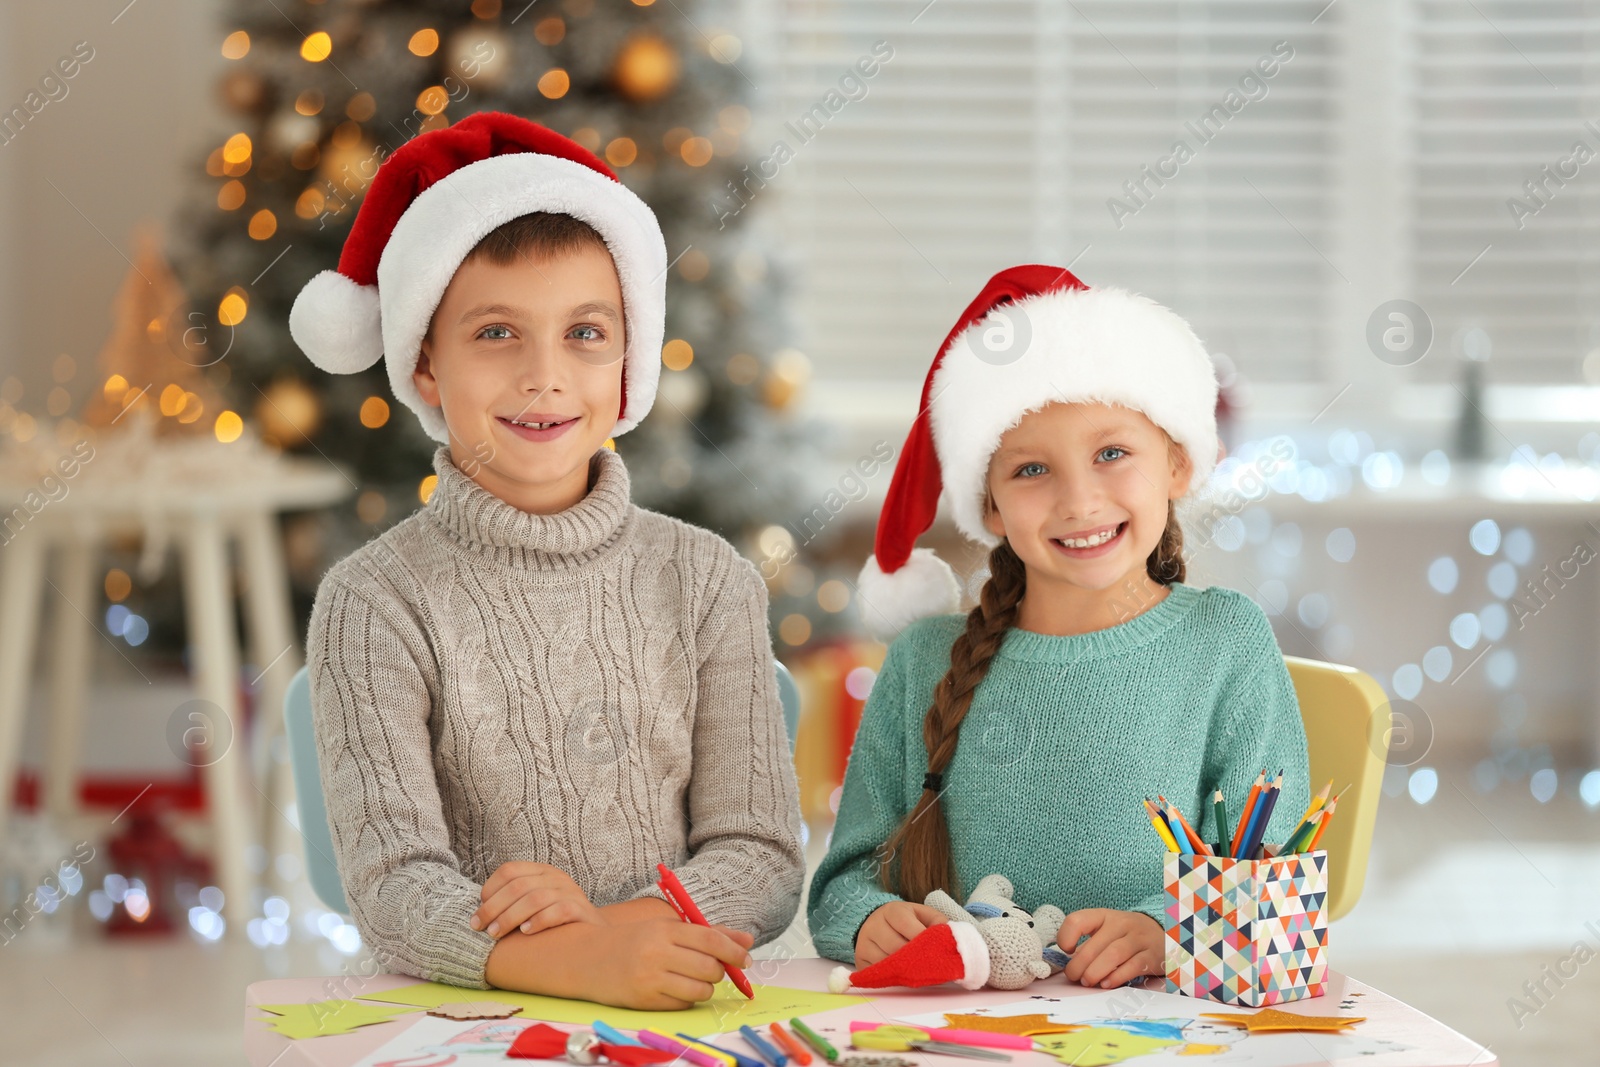 Photo of Little children in Santa hats making craftworks at table indoors. Christmas season